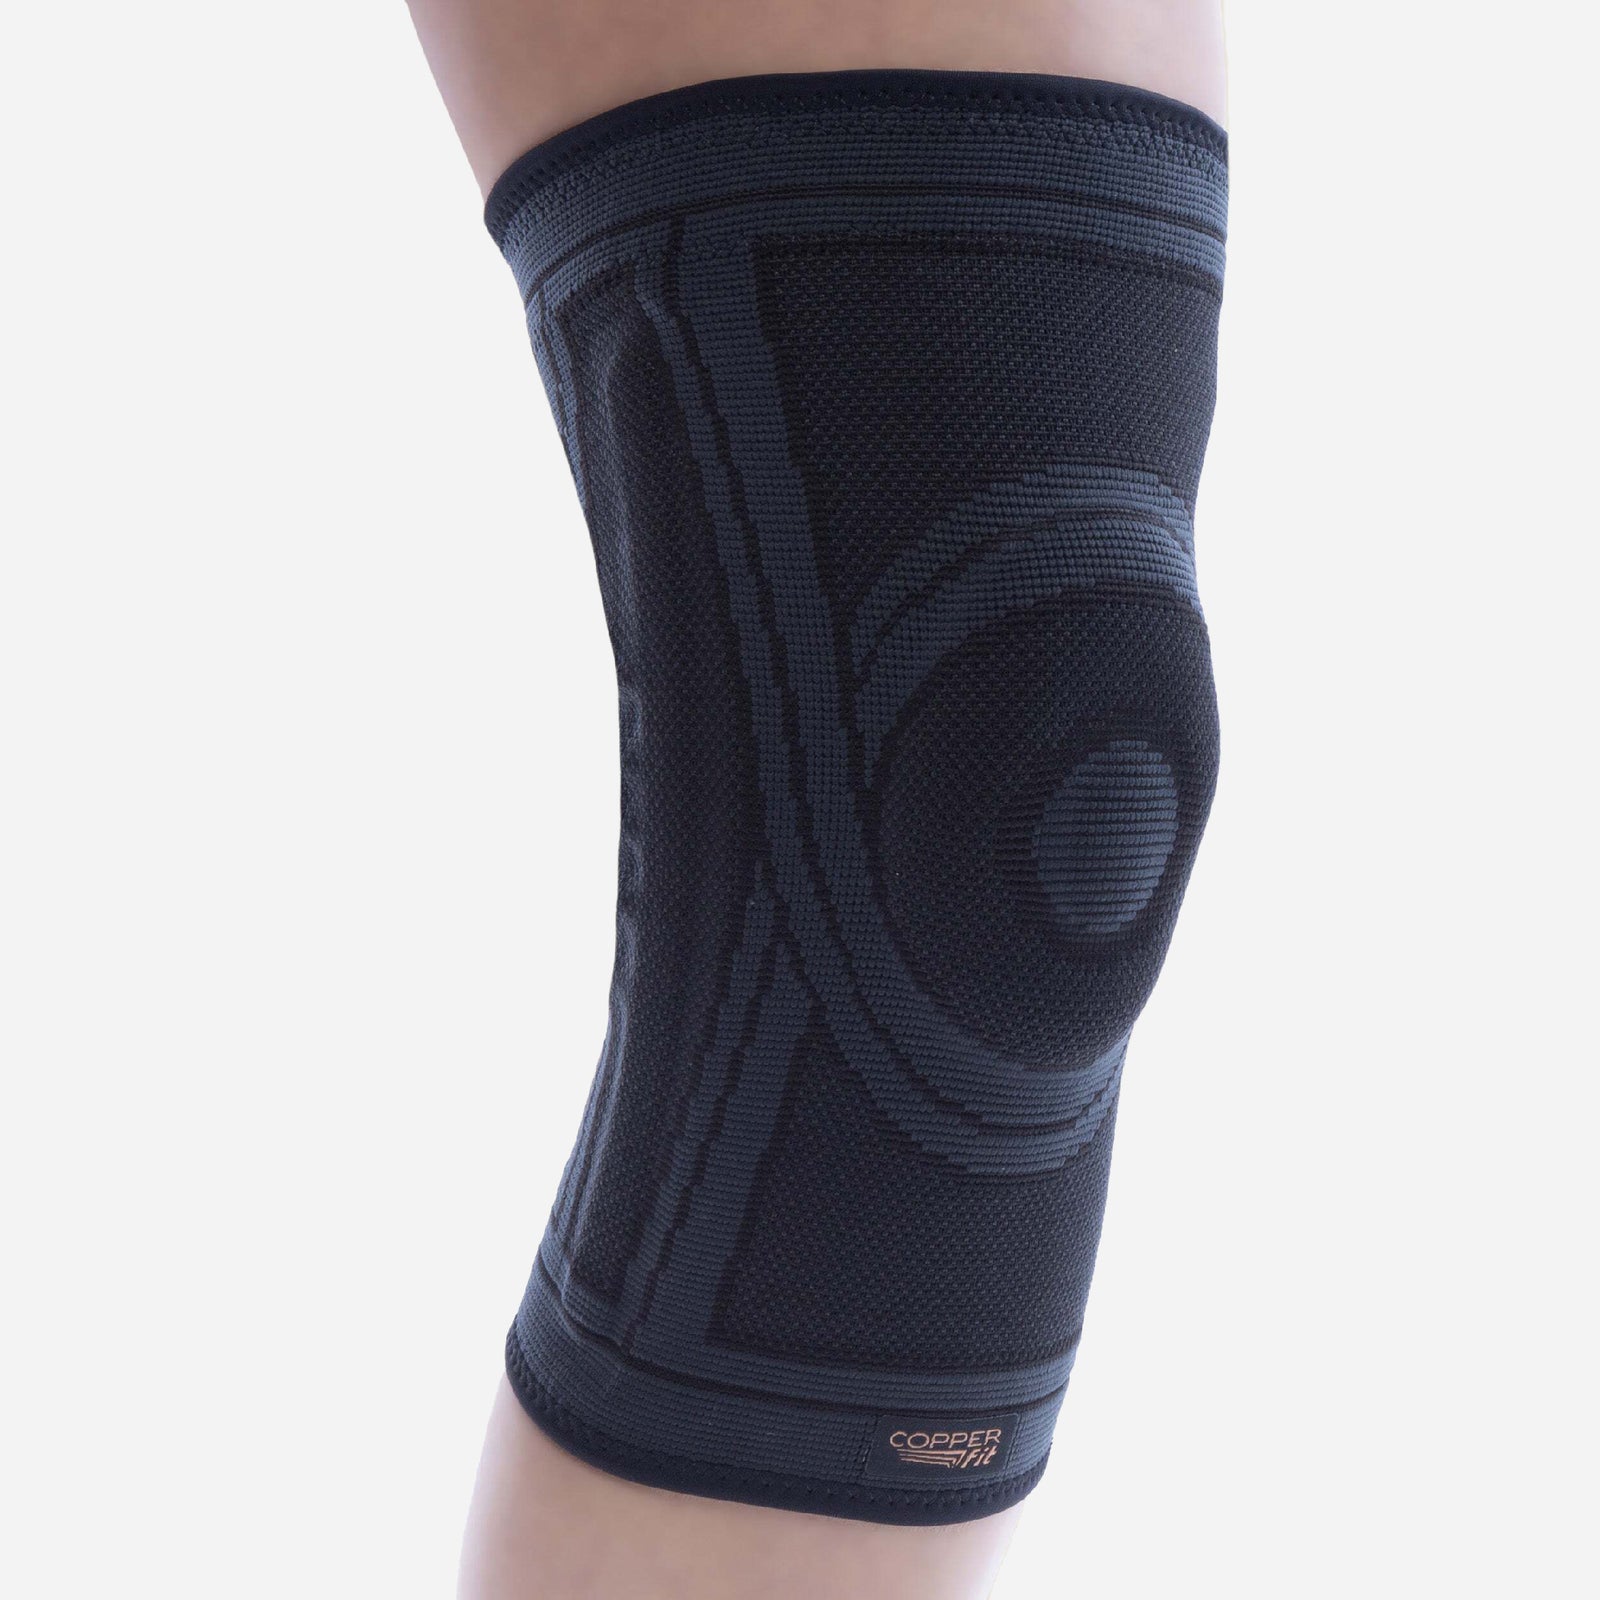 2x Knee Sleeves Copper Silver Compression Brace Support Sport Joint Injury  Gel - La Paz County Sheriff's Office Dedicated to Service